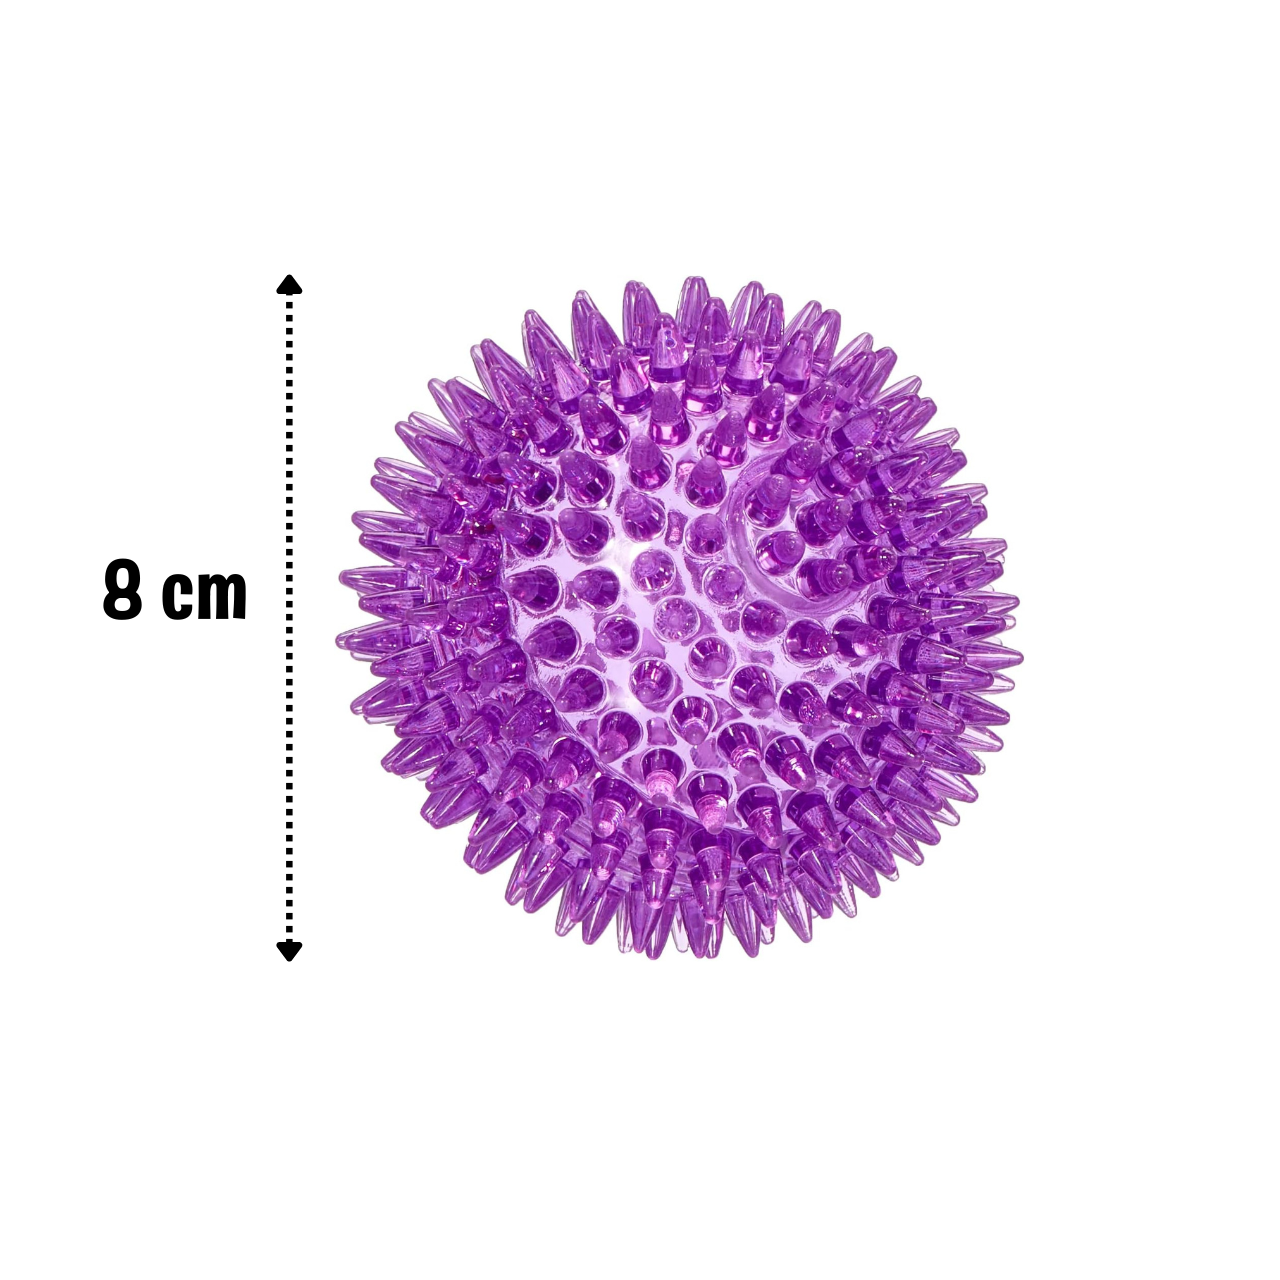 Rosewood Jolly Doggy Catch and Play Spikey Rubber Ball for Dogs, Purple